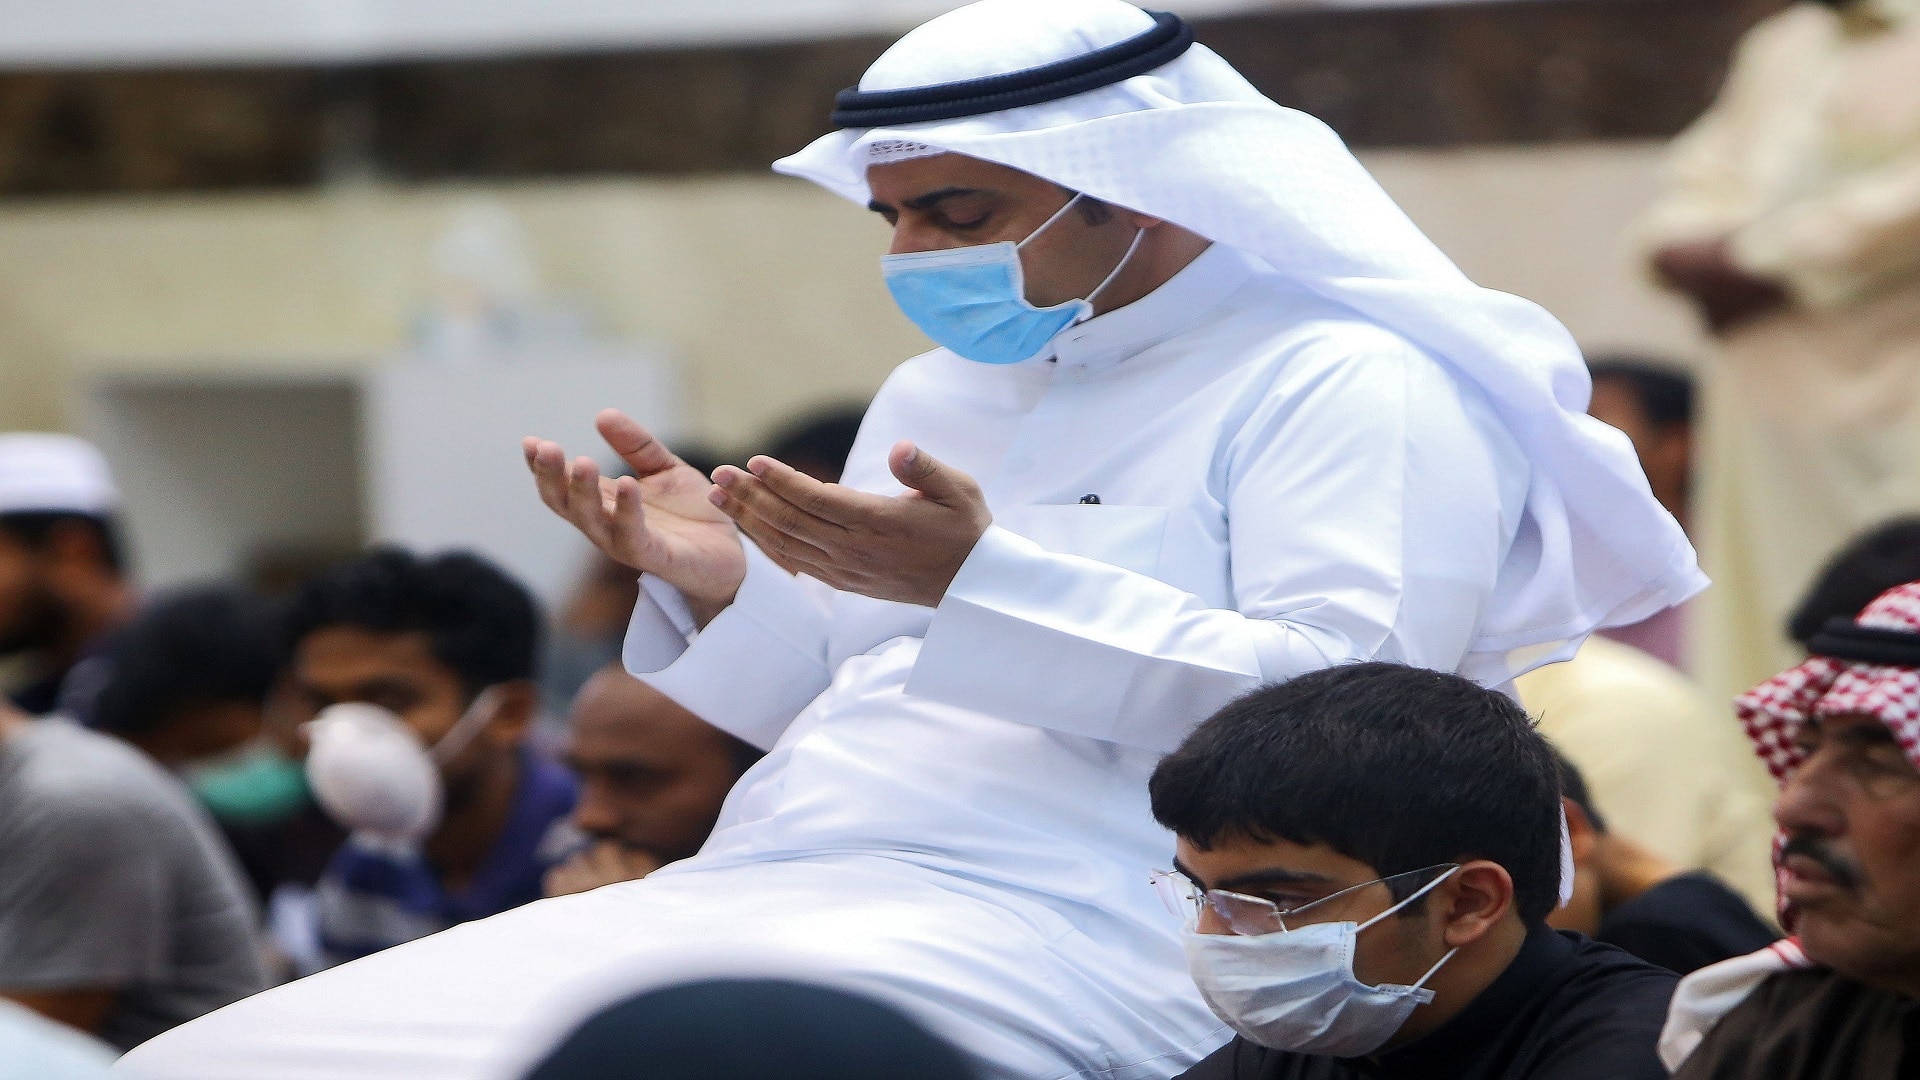 Muslim men wearing protective masks perform Friday prayers at a mosque in Kuwait City on February 28, 2020. - Kuwait's Ministry of Awqaf and Islamic Affairs set the Friday prayer sermon to not exceed 10 minutes, and to discuss precautions against COVID-19 coronavirus disease infections. Kuwait has recorded 43 coronavirus cases since its outbreak, the United Arab Emirates reported 13, while Bahrain has 33, and Oman is at four cases. Government institutions in the gulf country suspended the use of fingerprint recognition to clock in and out. (Photo by YASSER AL-ZAYYAT / AFP) (Photo by YASSER AL-ZAYYAT/AFP via Getty Images) watanserb.com